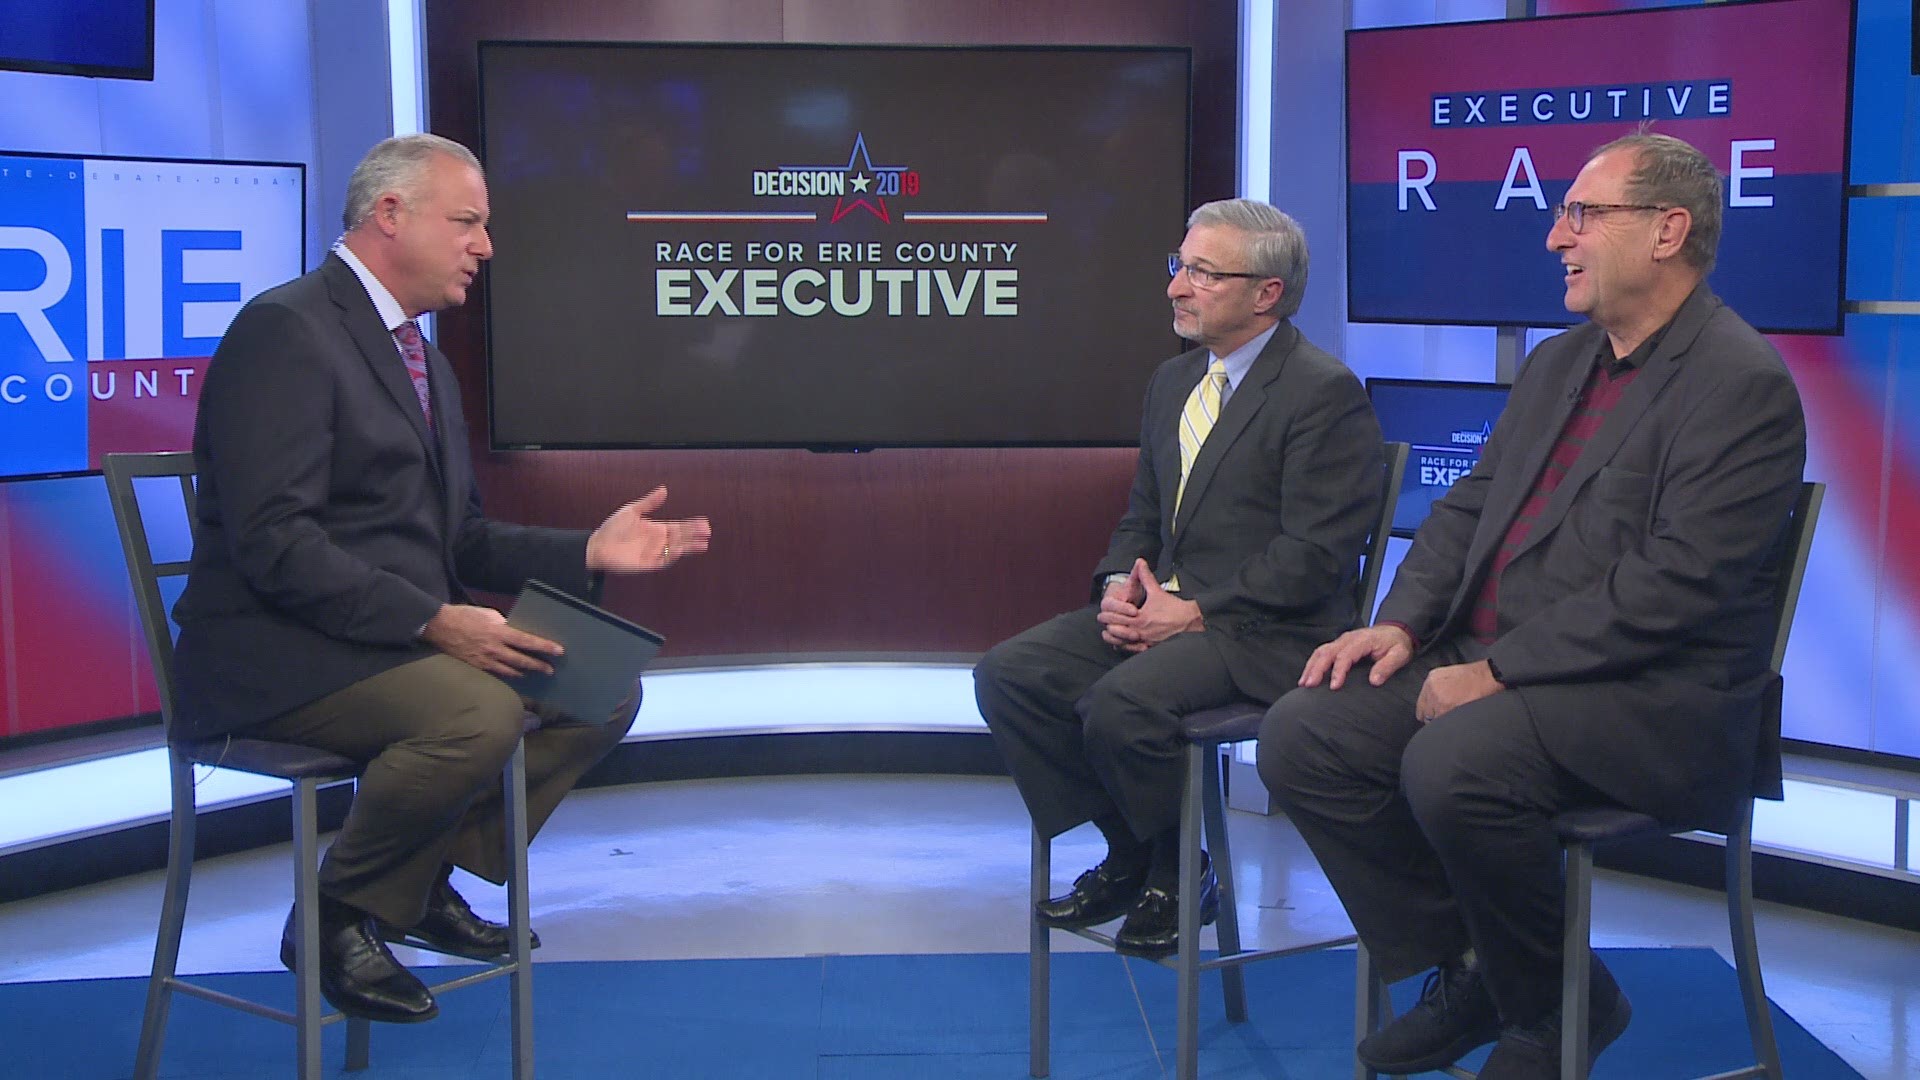 Carl Calabrese and Bruce Fisher join Scott Levin for analysis of the Erie County Executive debate